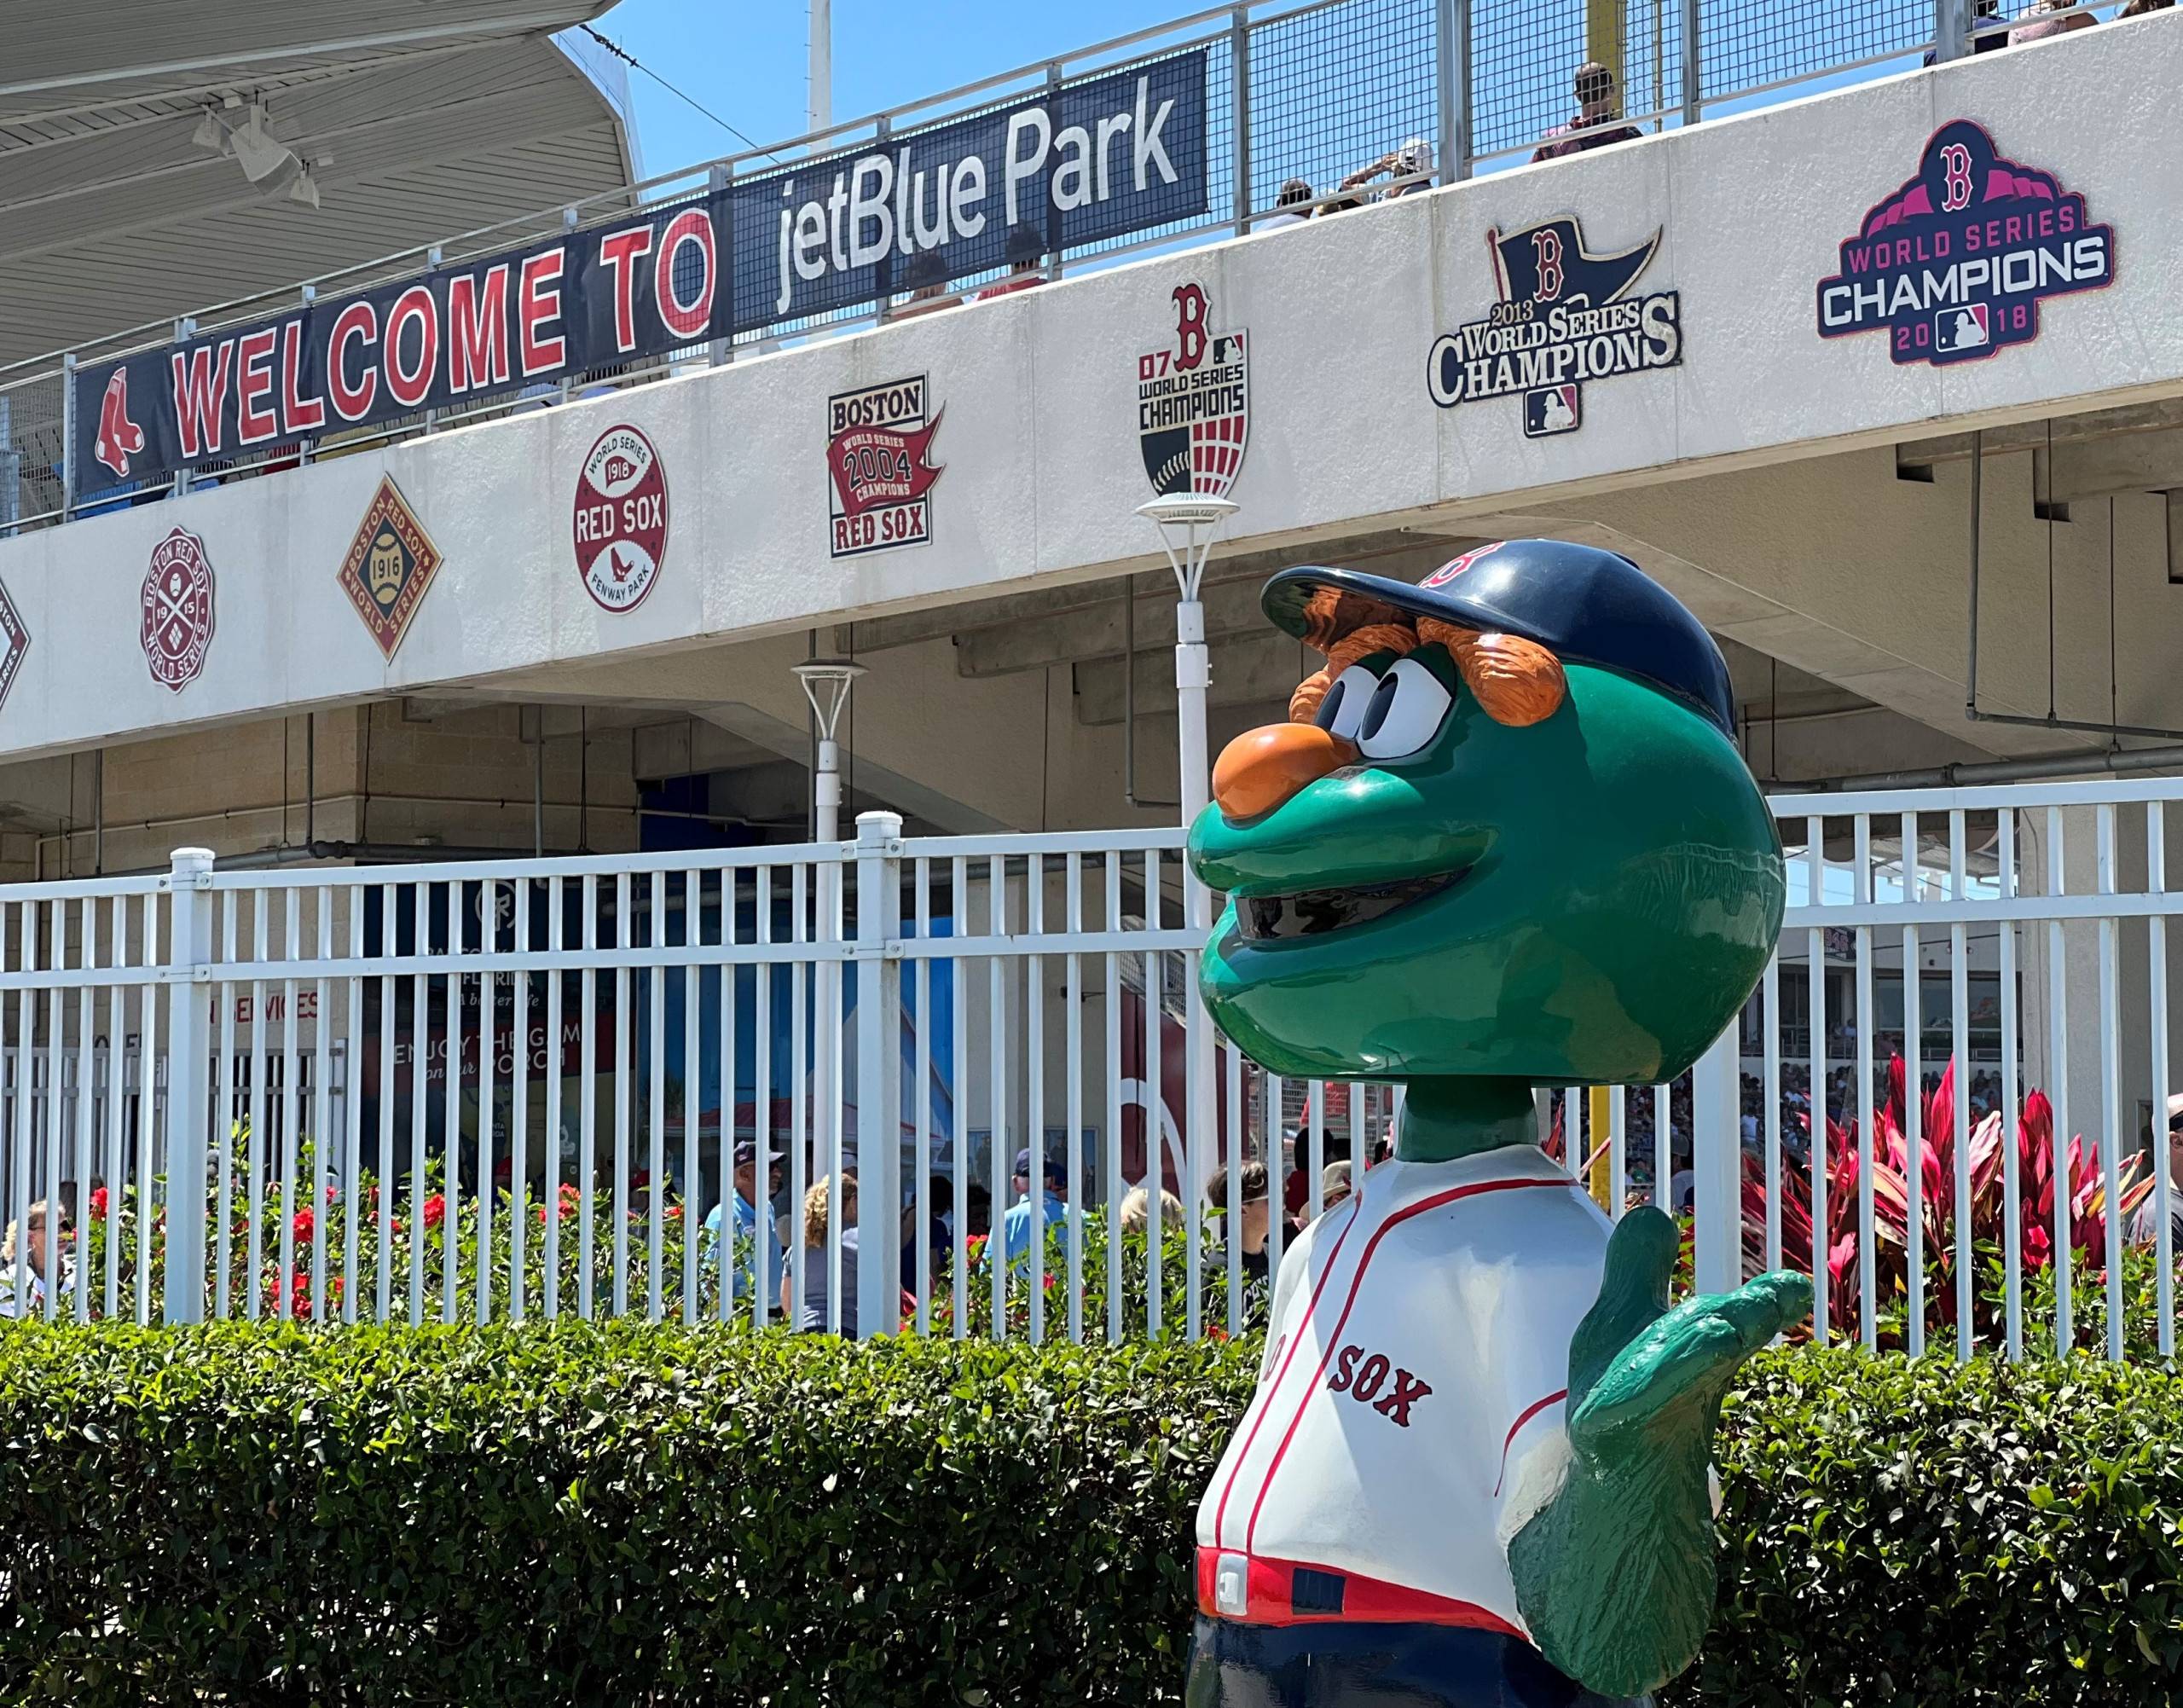 Statue of mascot in front of Welcome to jetBlue Park sign